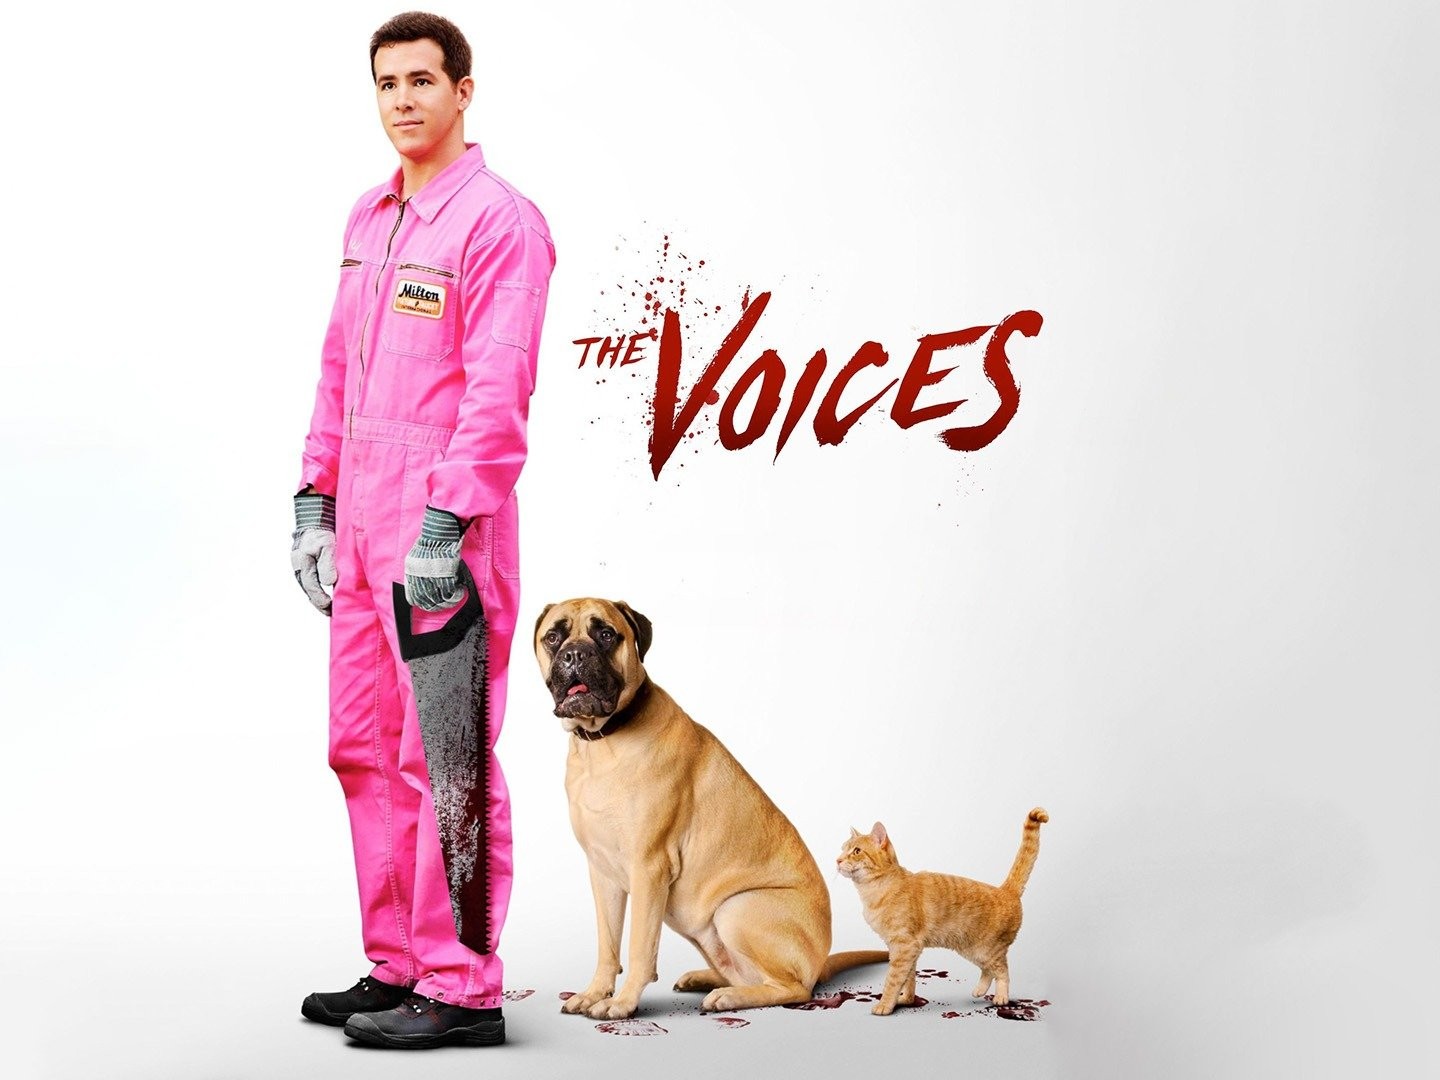 The Voices - Rotten Tomatoes